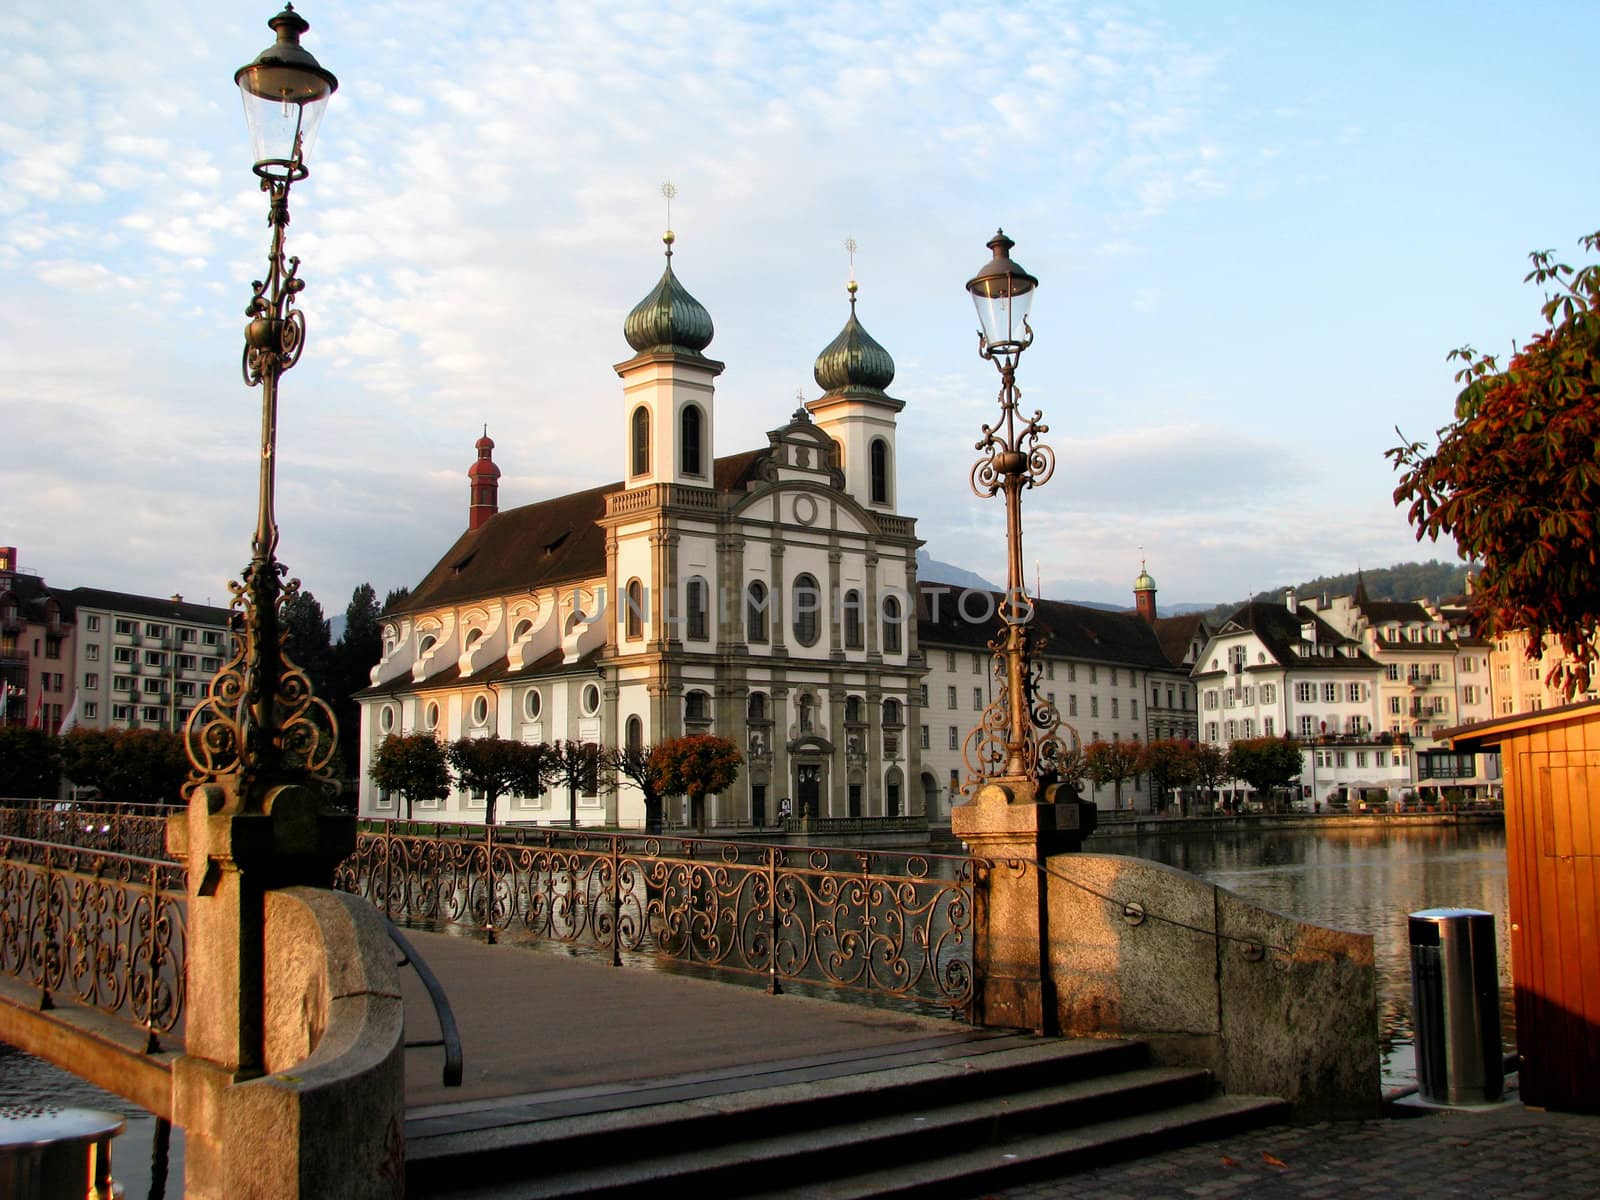 The cathedral of Lucerne in Lucerne, Switzerland